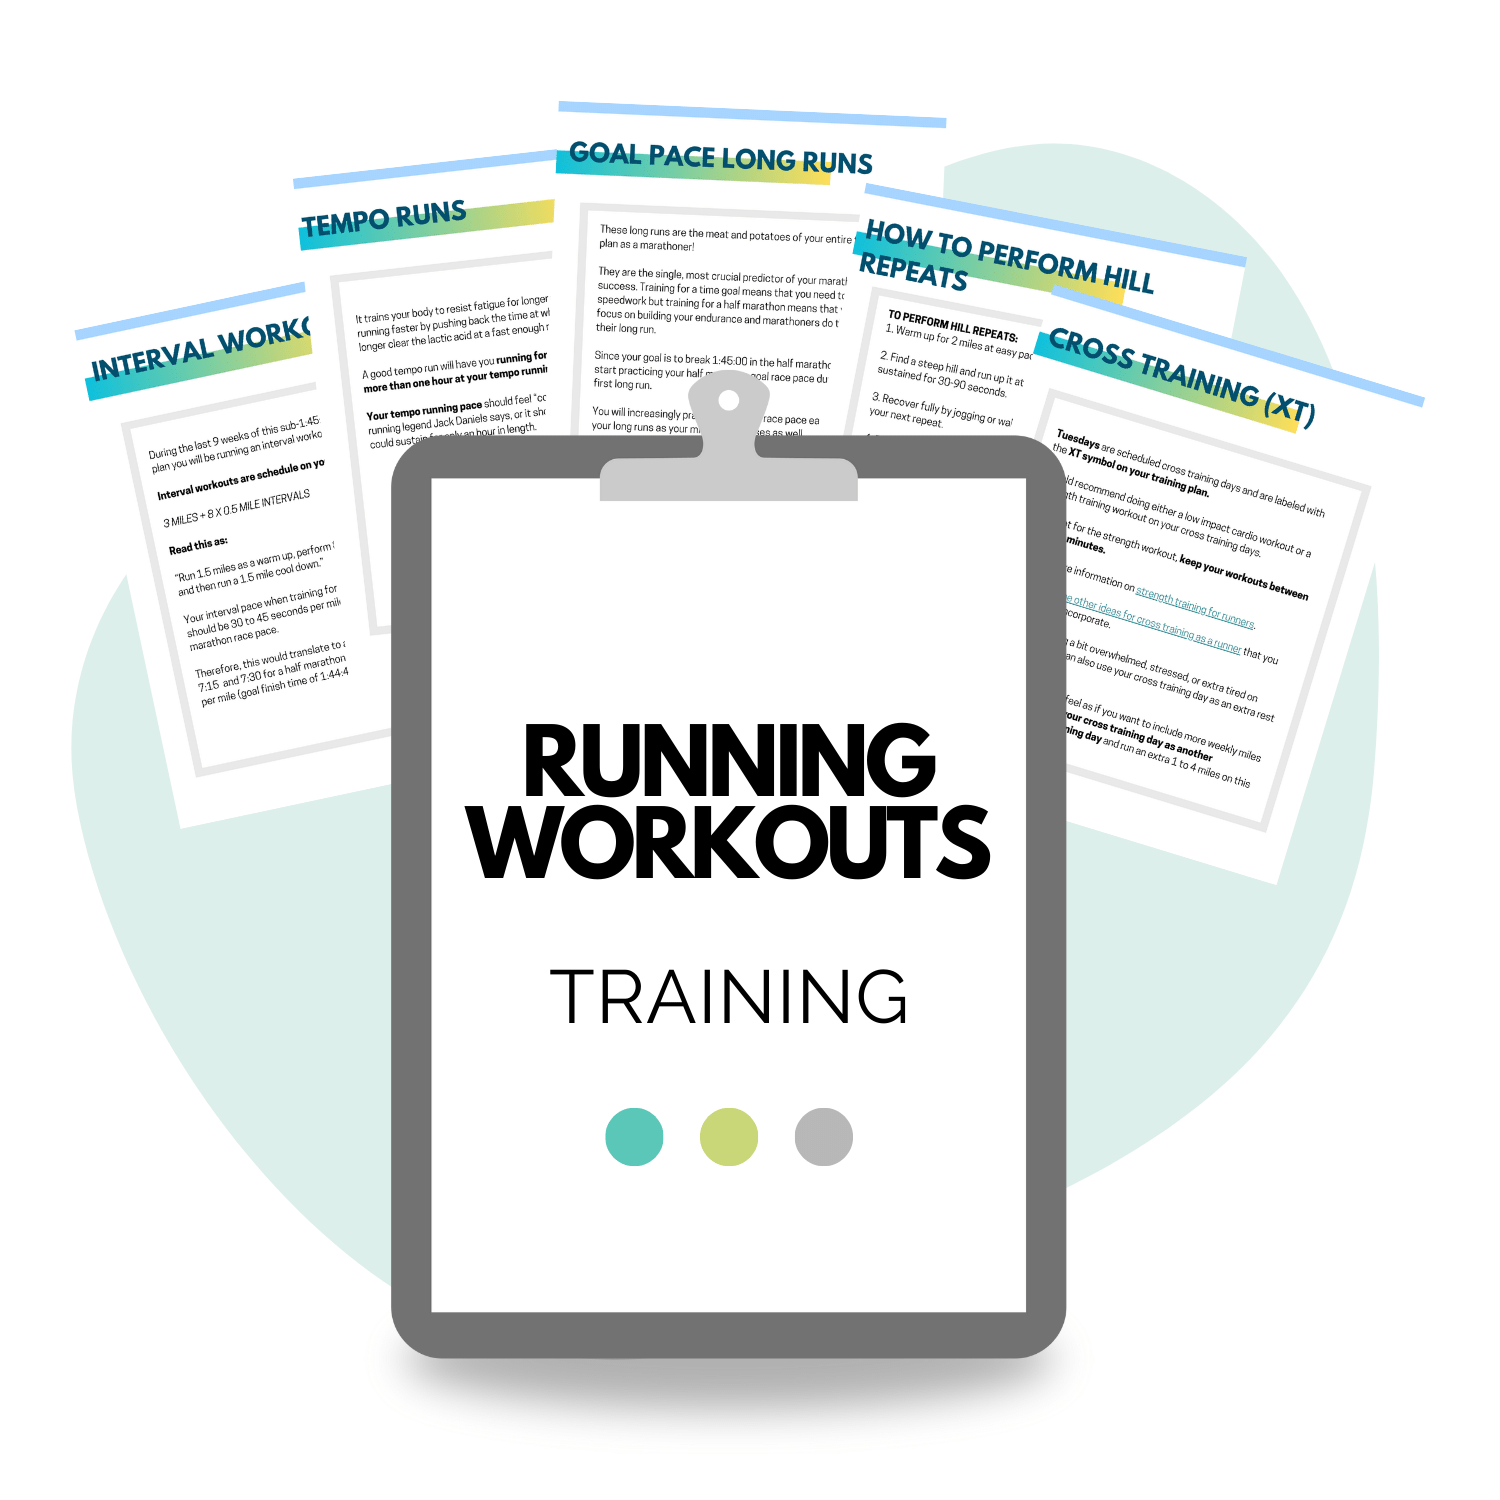 Mockup of the running workouts that are inside the 12 week half marathon training plans for the 1:30, 1:45, 2 hours, 2:15, 2:30, 2:45 and 3 hour half marathon finishing time goal